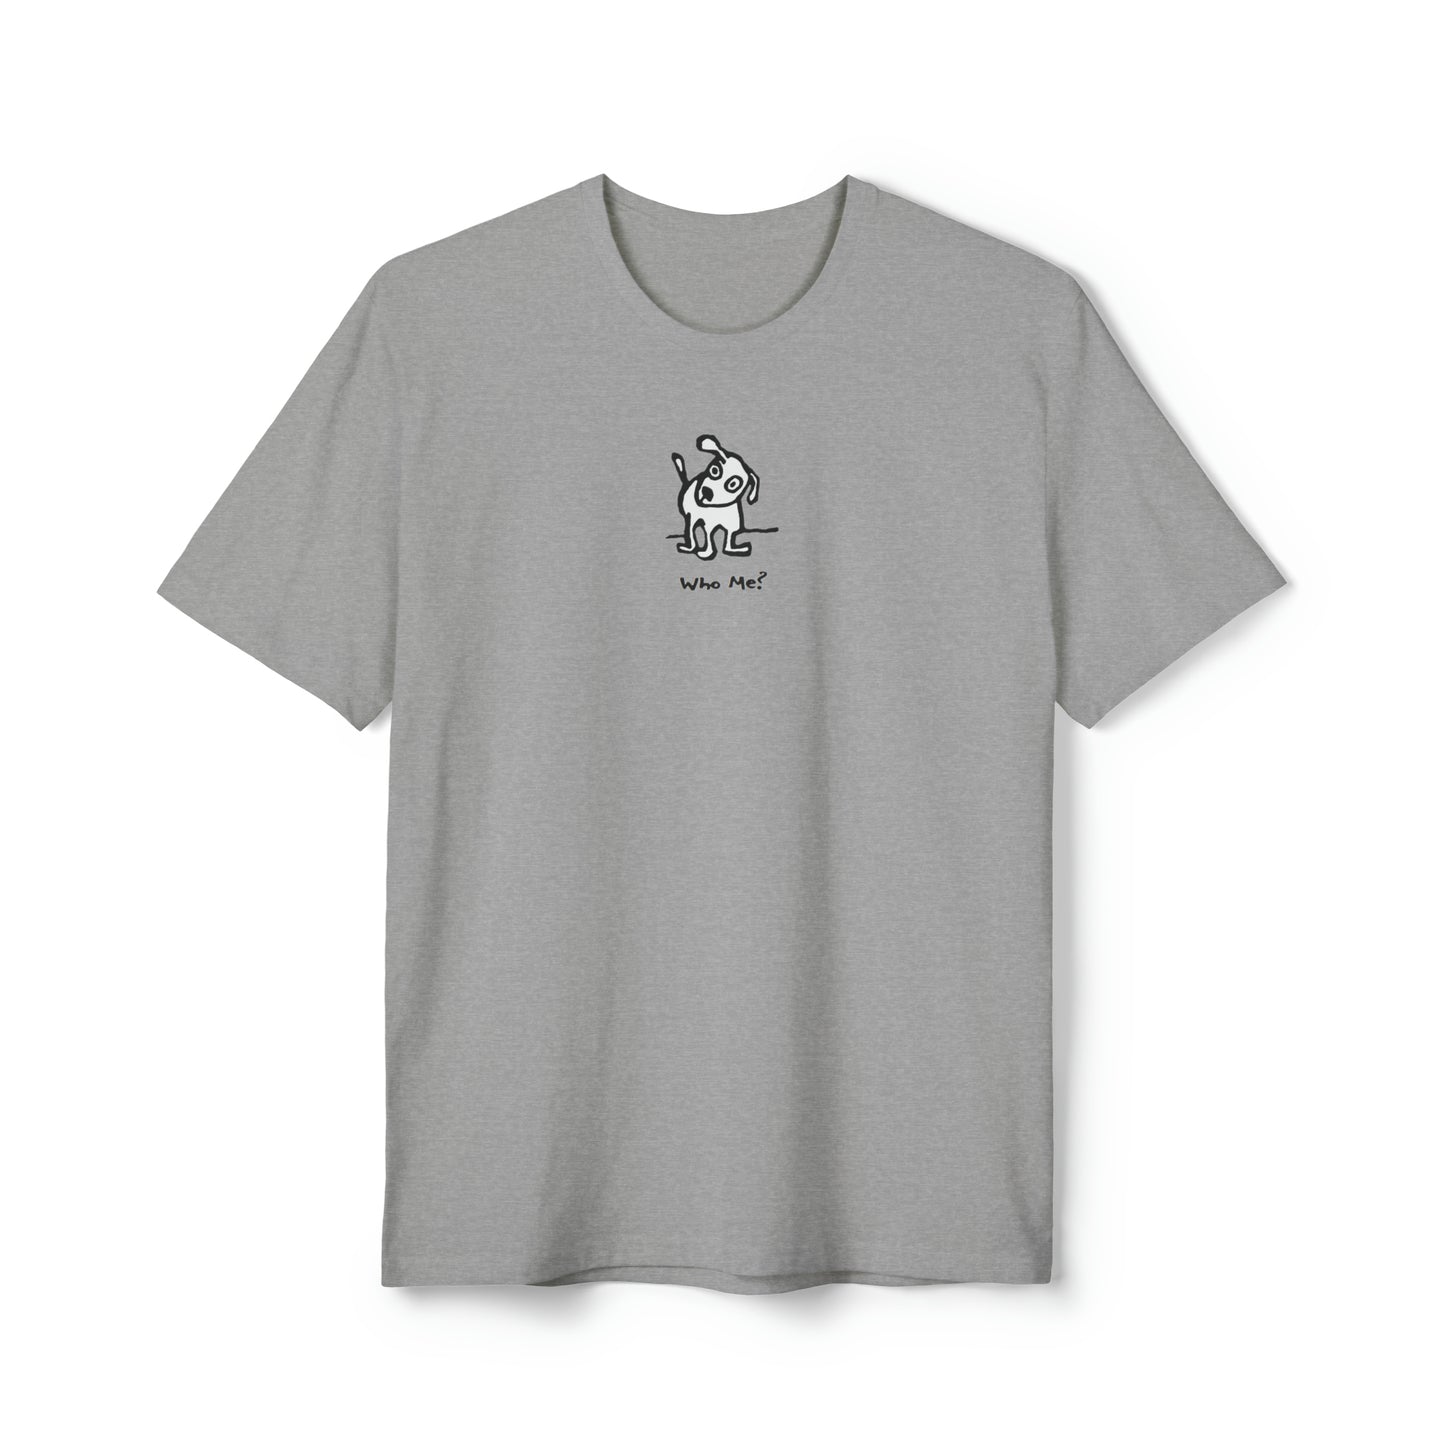 Black and white dog with head cocked to one side on light heather gray color recycled unisex men's t-shirt. Text under image says Who Me?